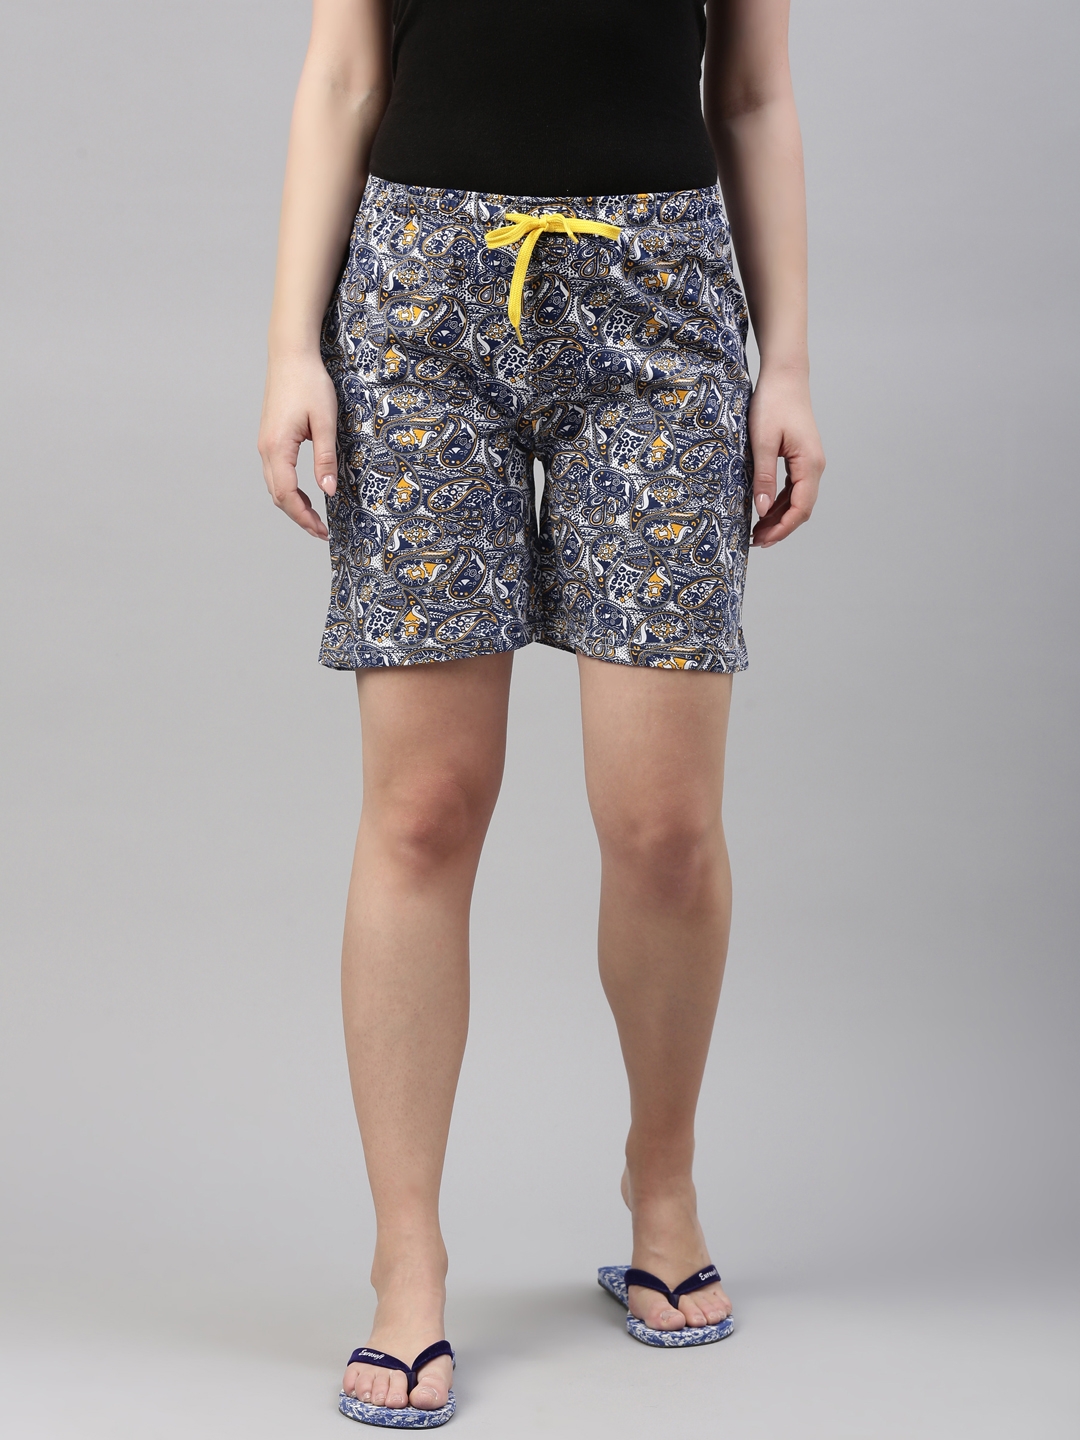 Kryptic | Kryptic Women's 100% Cotton Printed Shorts - Pack of 2 1